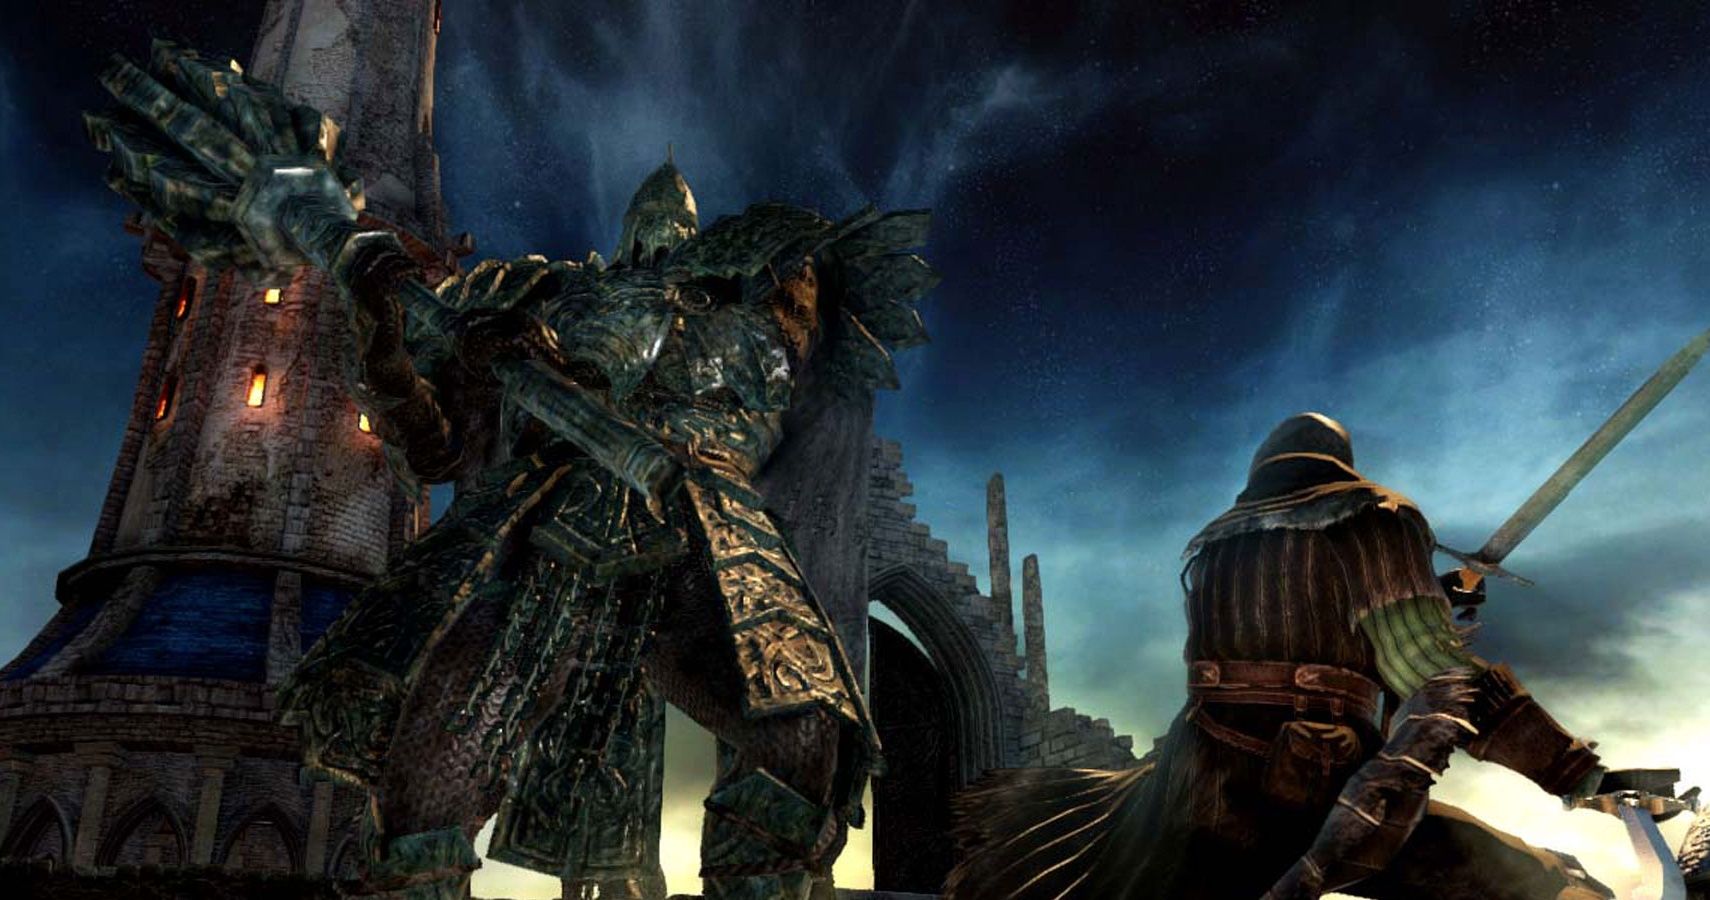 will dark souls 2 come to switch